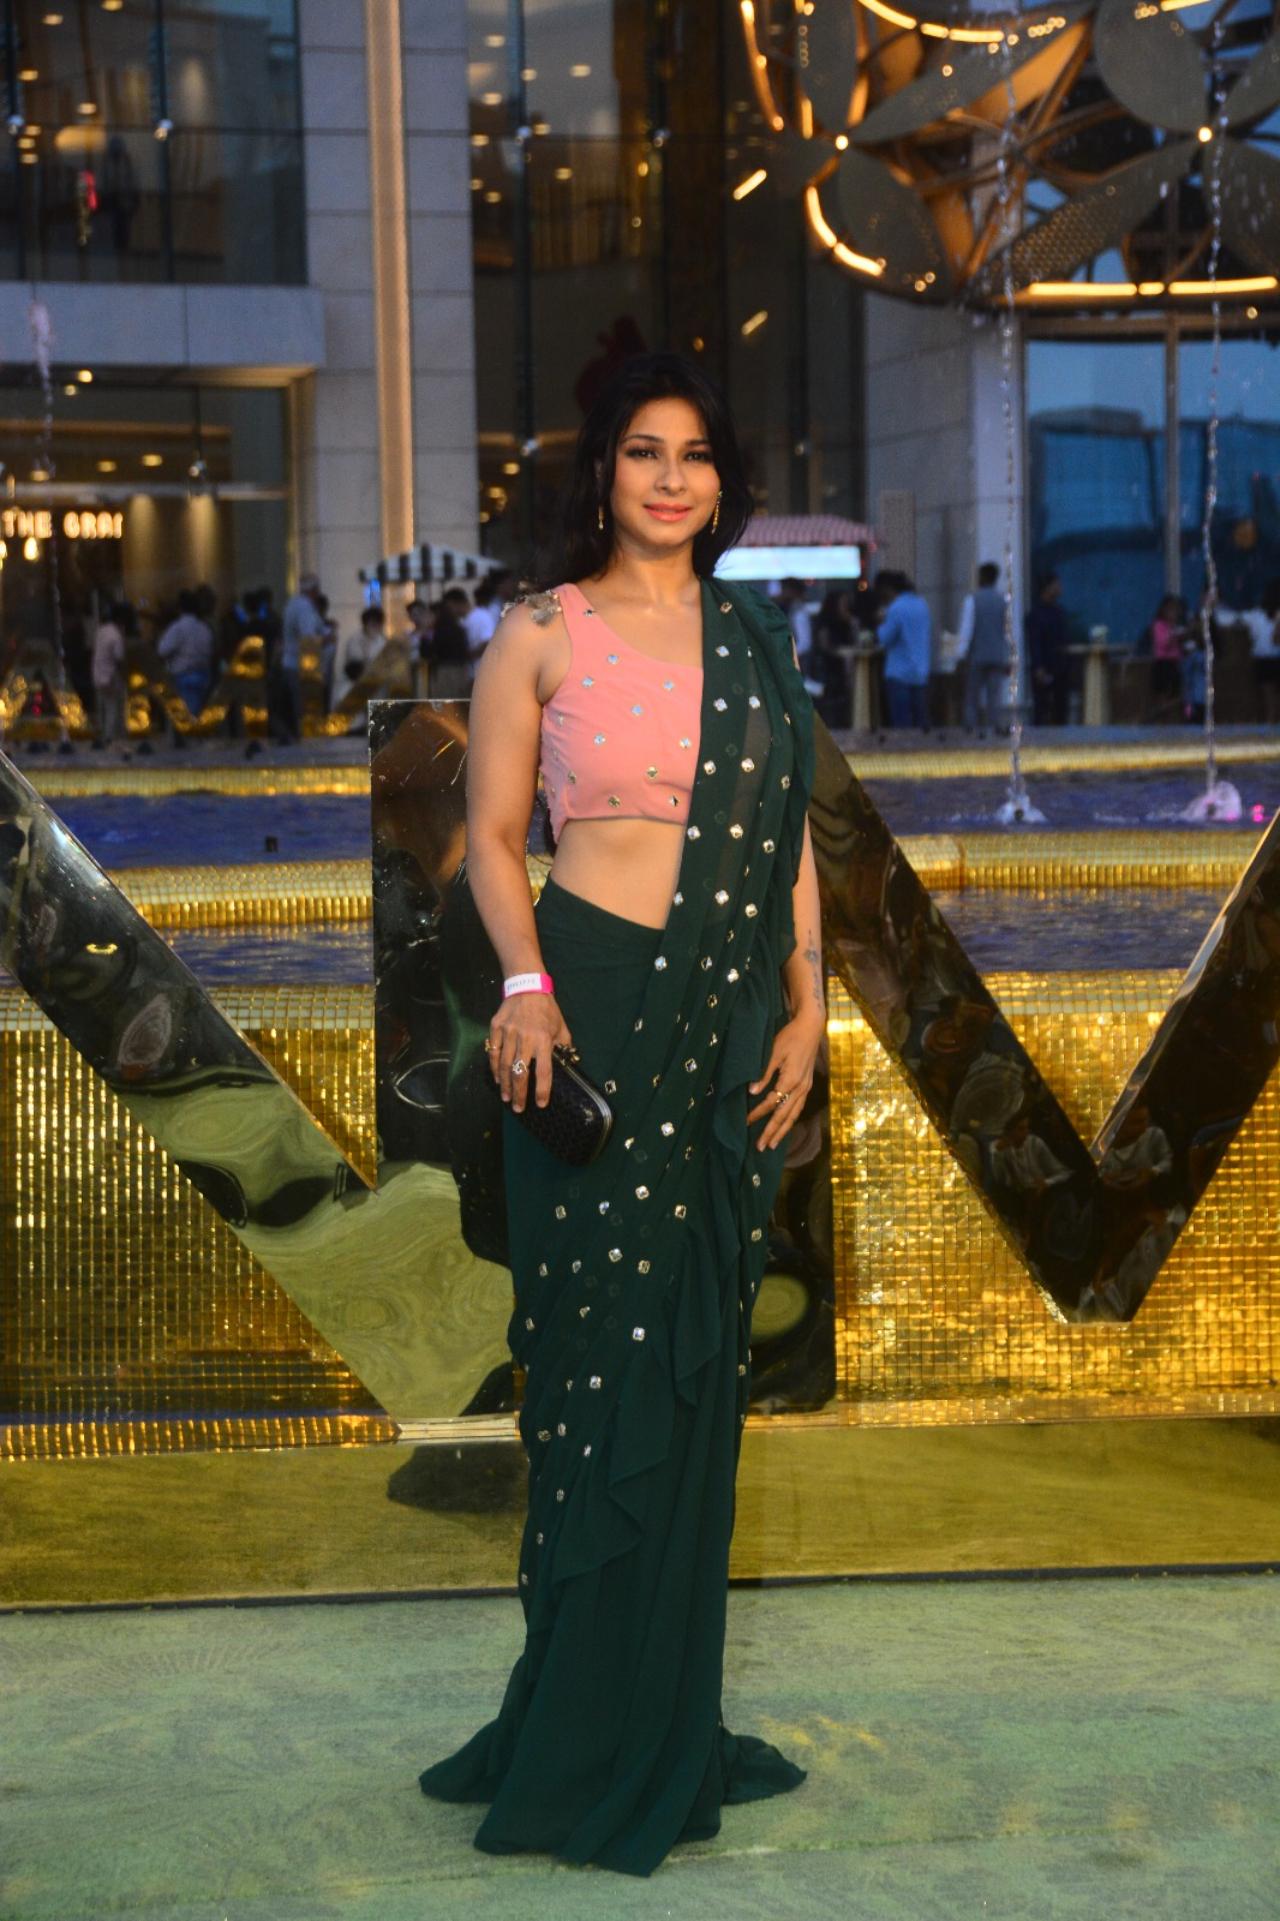 Actress Tanishaa Mukerji was seen in a pink and green saree for the night